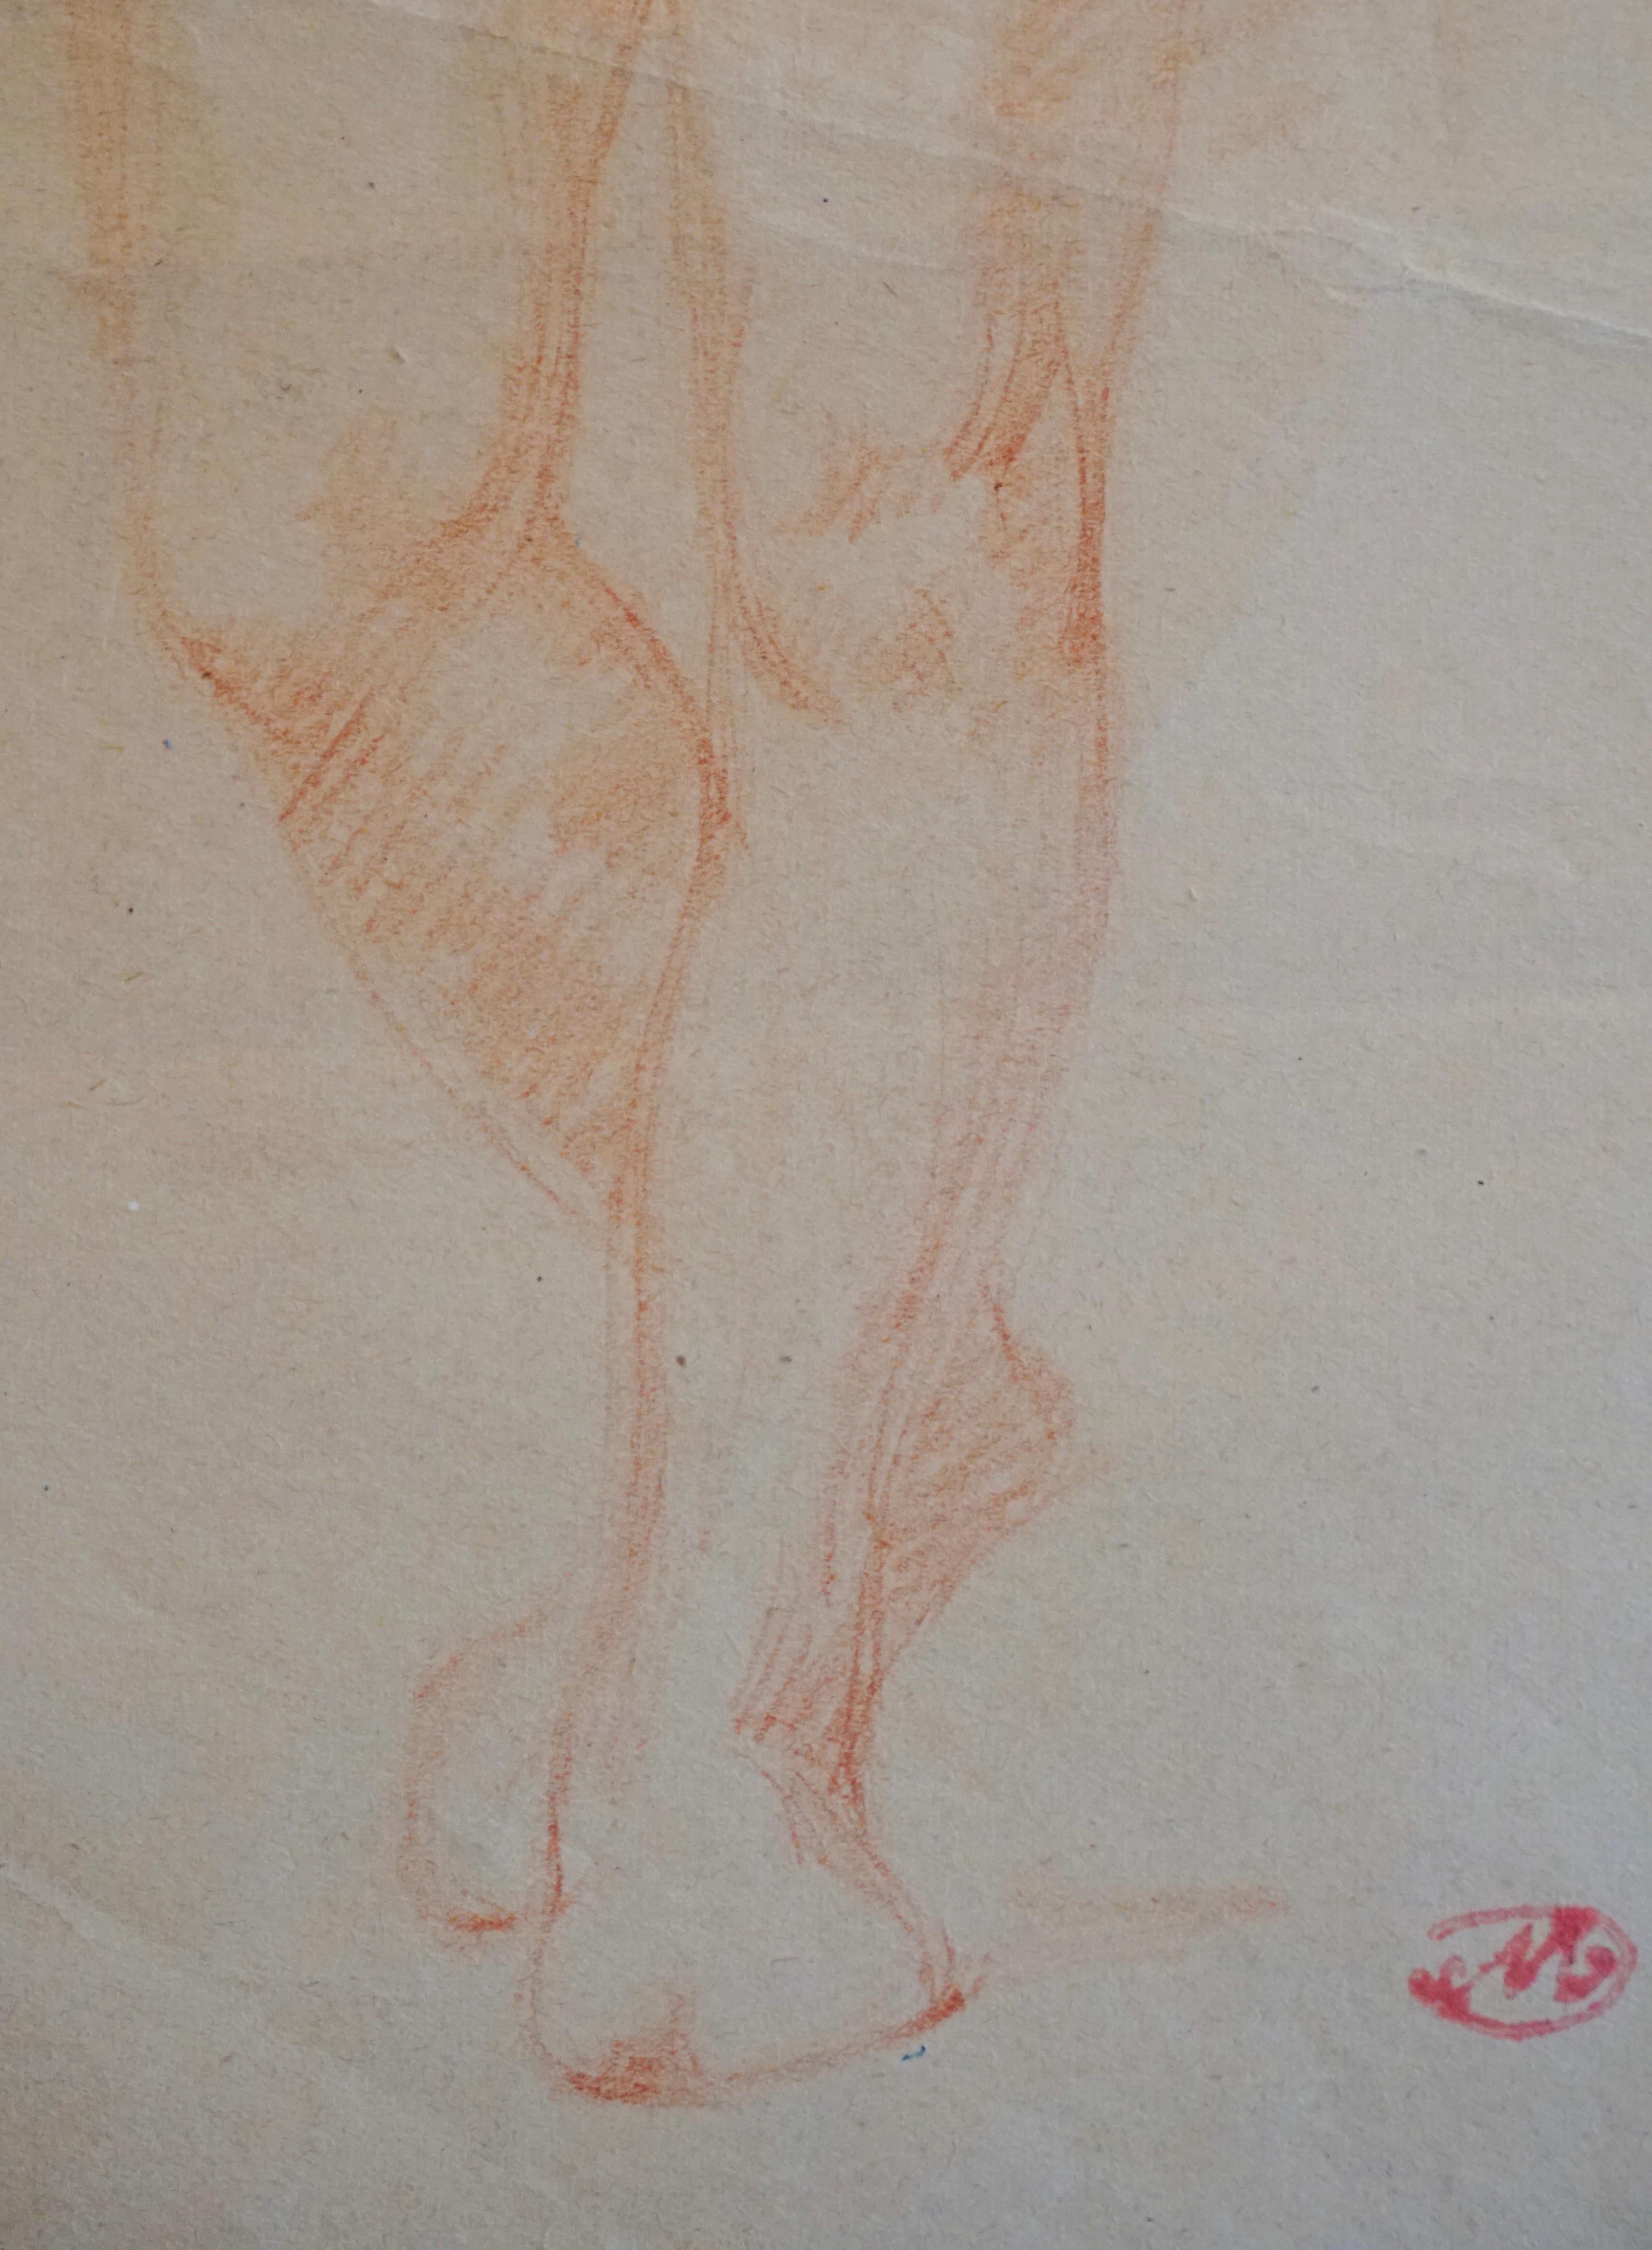 Hand-Painted Aristide Maillol Original Sanguine Nude Drawing, 1950s